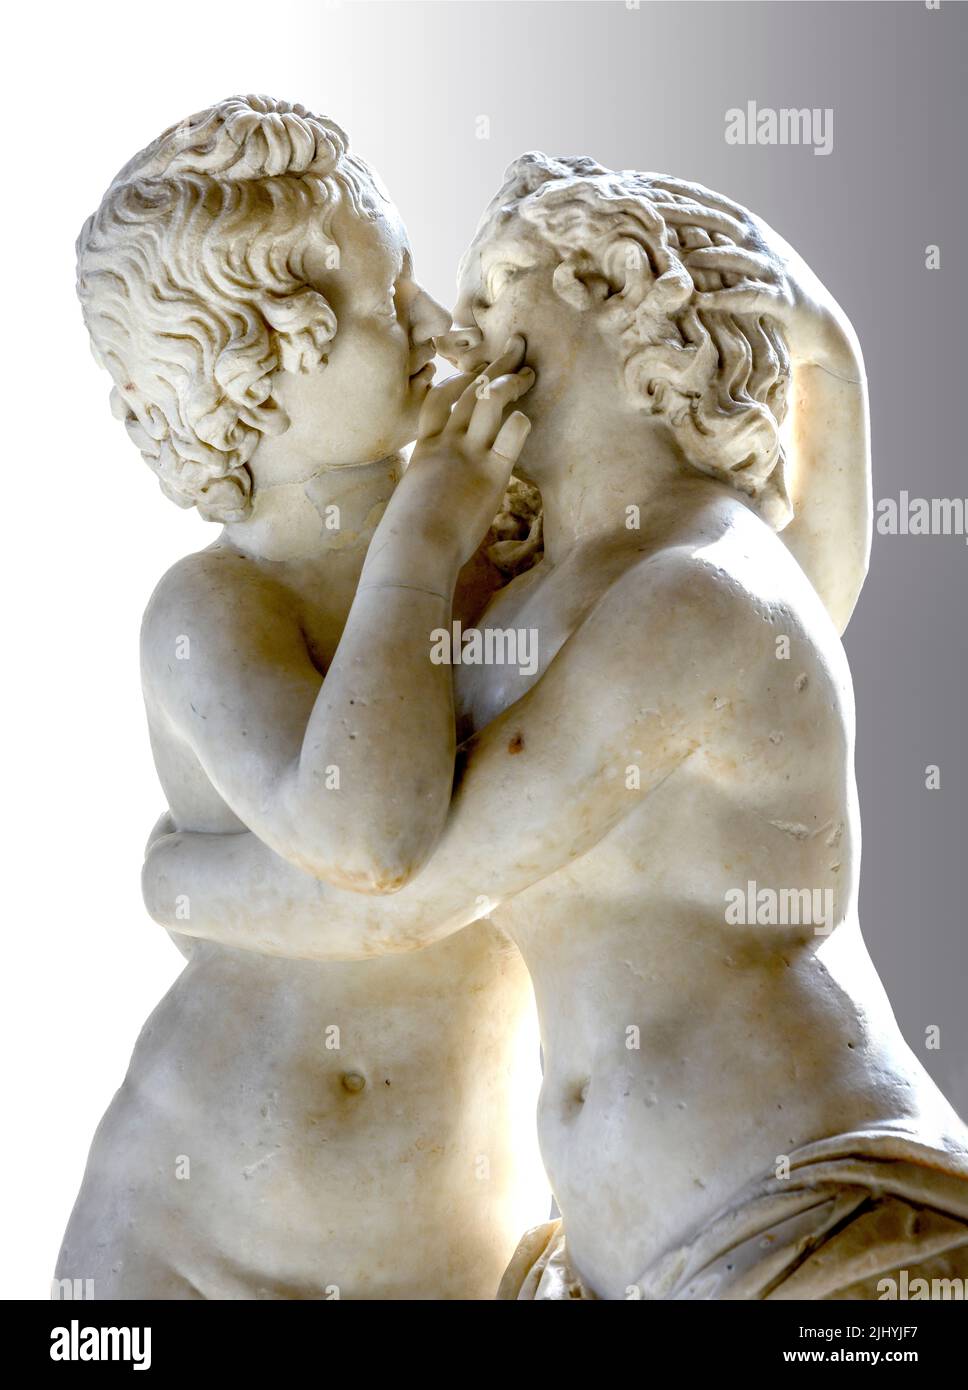 Statue of Cupid and Psyche !st or 2nd cen. AD. in the Capitoline Museums, Rome, Italy. Stock Photo